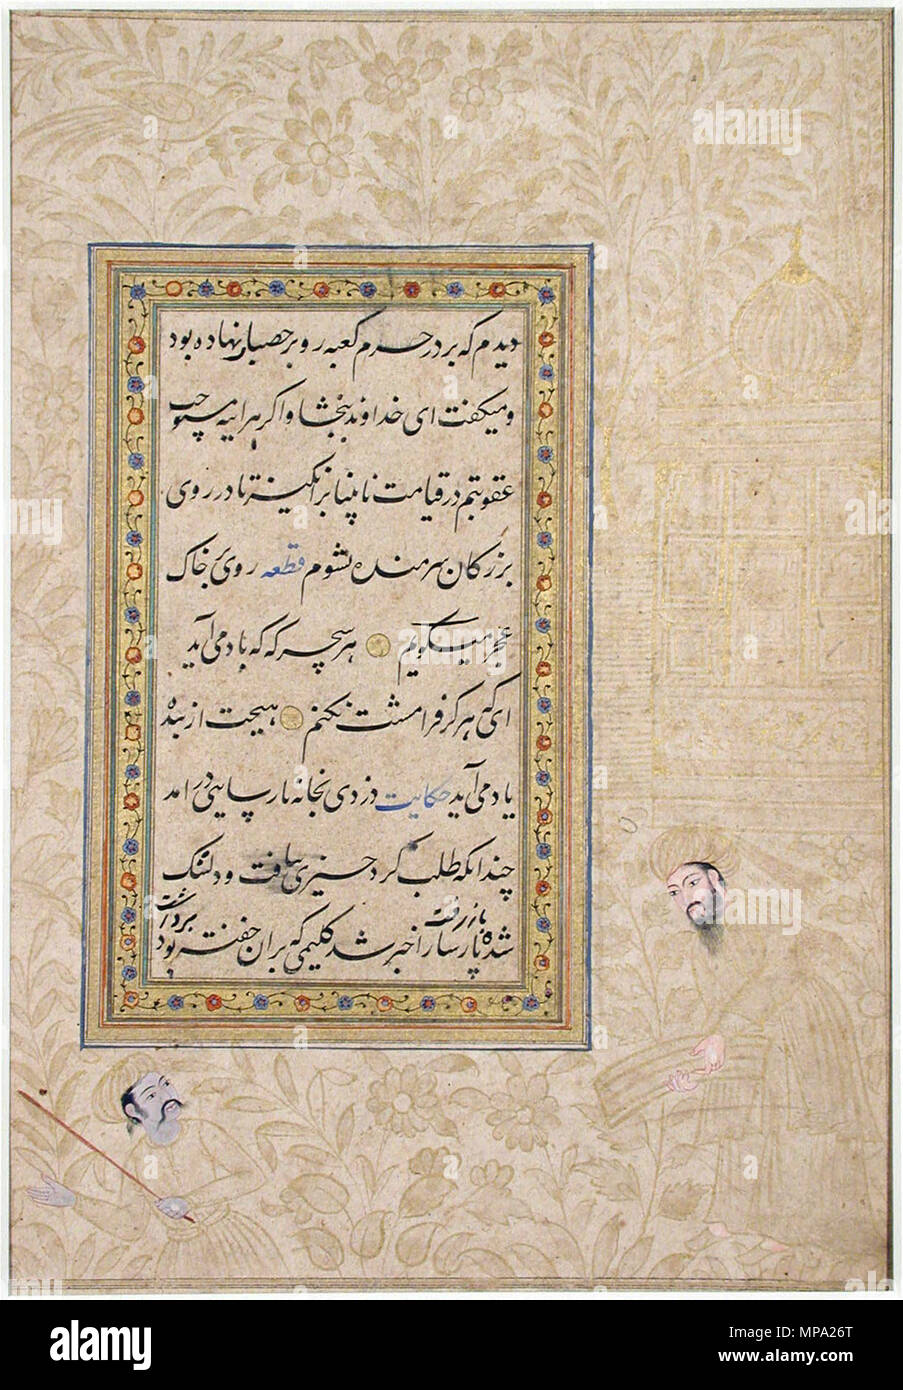 . English: Series Title: Gulestan of SaÃdi Creation Date: ca. 1610 Display Dimensions: 10 9/16 in. x 6 23/32 in. (26.8 cm x 17.1 cm) Credit Line: Edwin Binney 3rd Collection Accession Number: 1990.336 Collection: <a href='http://www.sdmart.org/art/our-collection/asian-art' rel='nofollow'>The San Diego Museum of Art</a> . 2 October 2001, 14:32:39. English: thesandiegomuseumofartcollection 799 Leaf of text with border decorations. Man before a pavilion and baton-weilder i (6124534383) Stock Photo